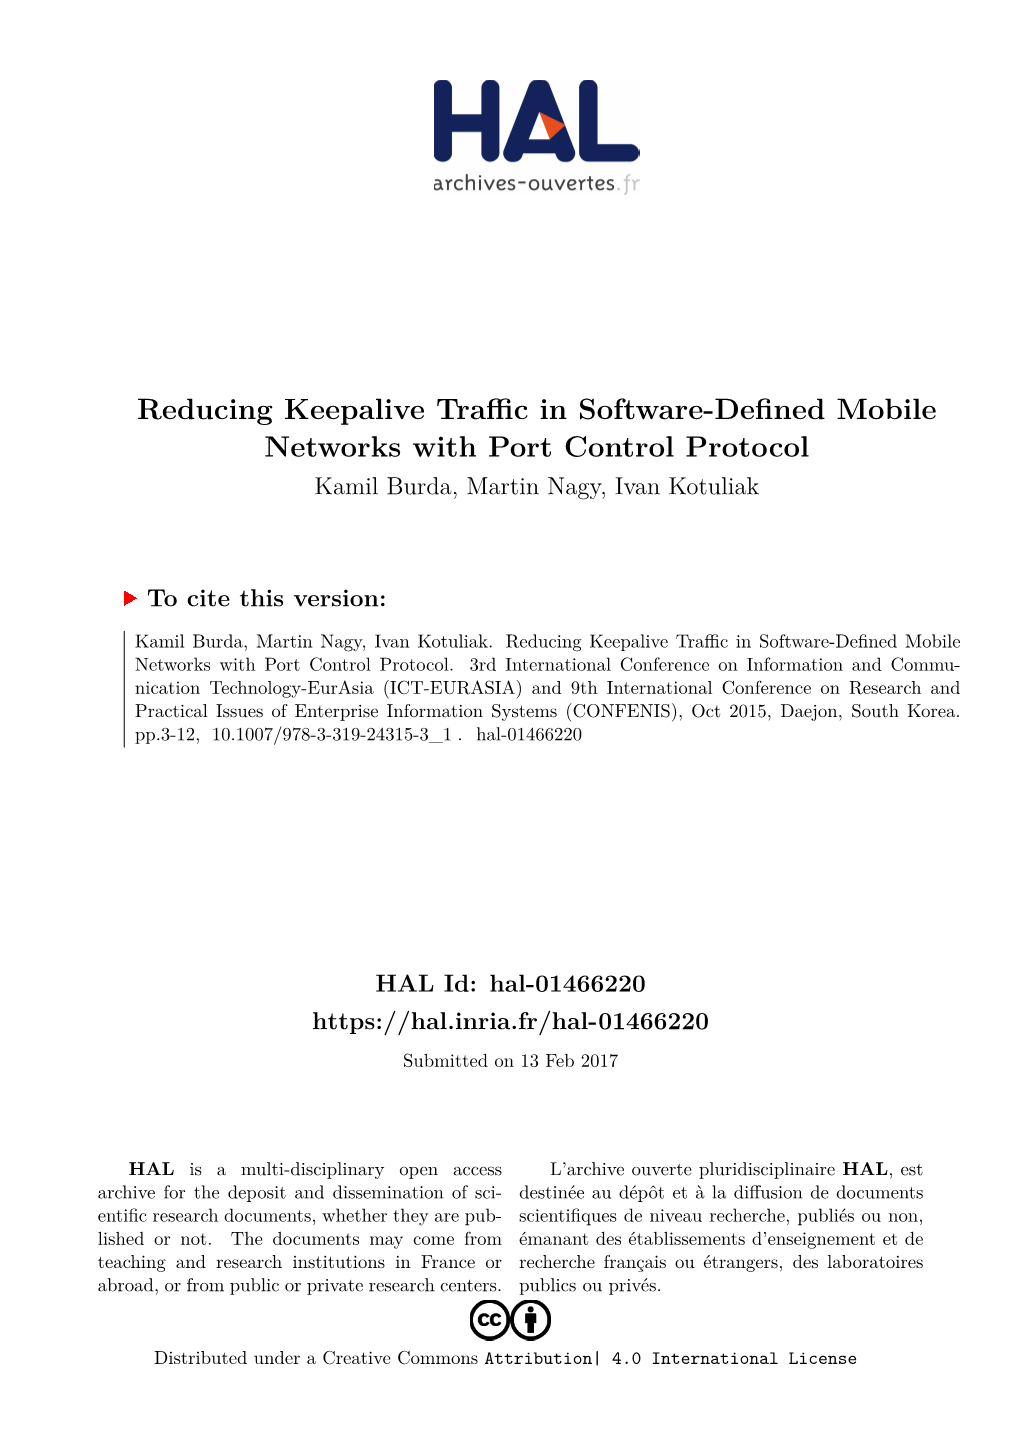 Reducing Keepalive Traffic in Software-Defined Mobile Networks